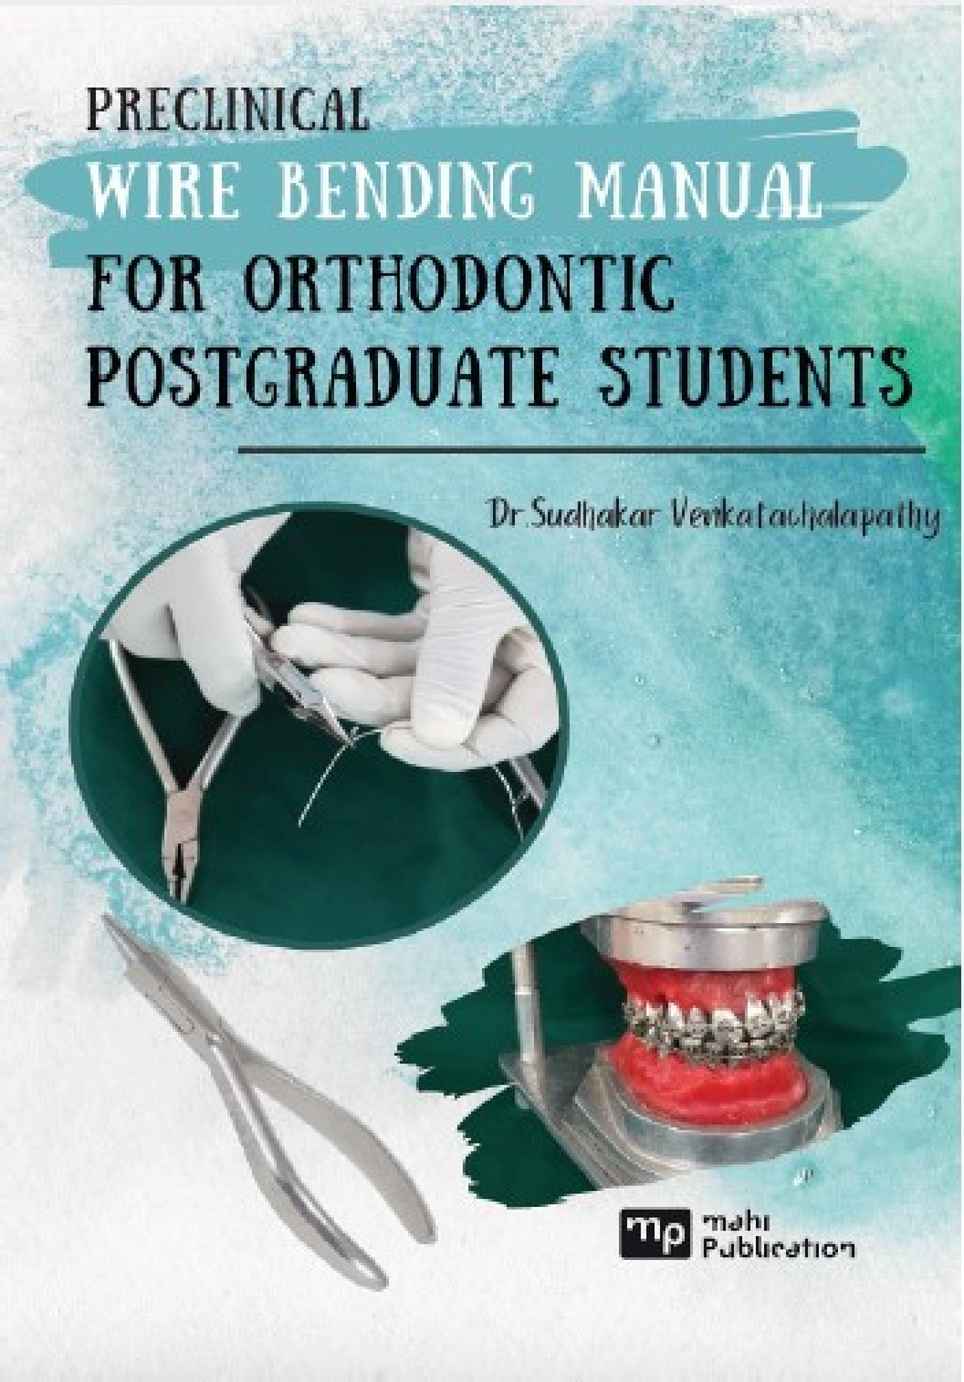 Preclinical Wire Bending Manual for Orthodontic Postgraduate Students